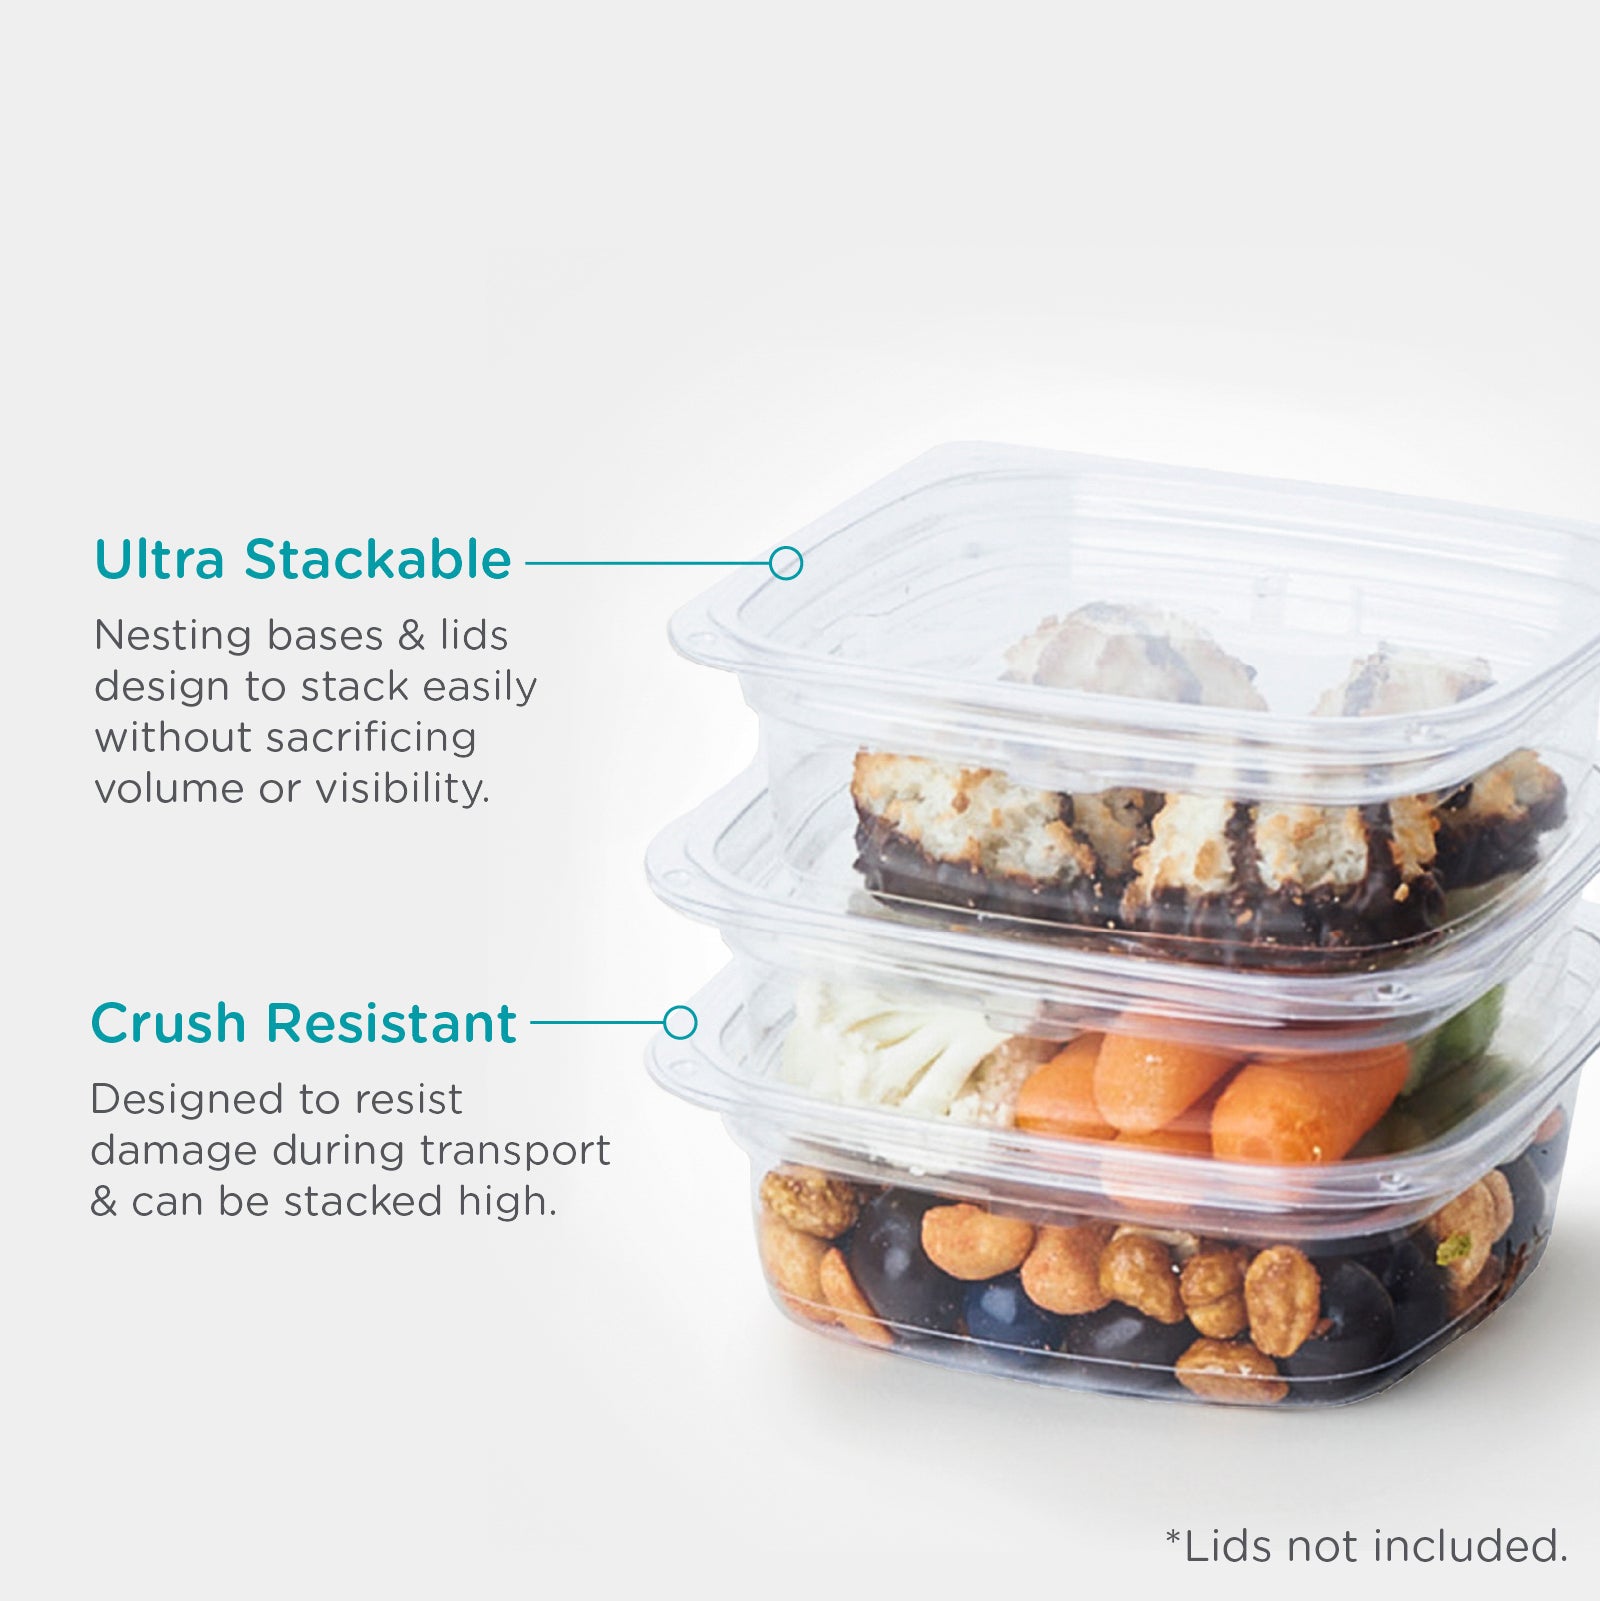 Guide to Care for Plastic Containers - Are Deli Containers